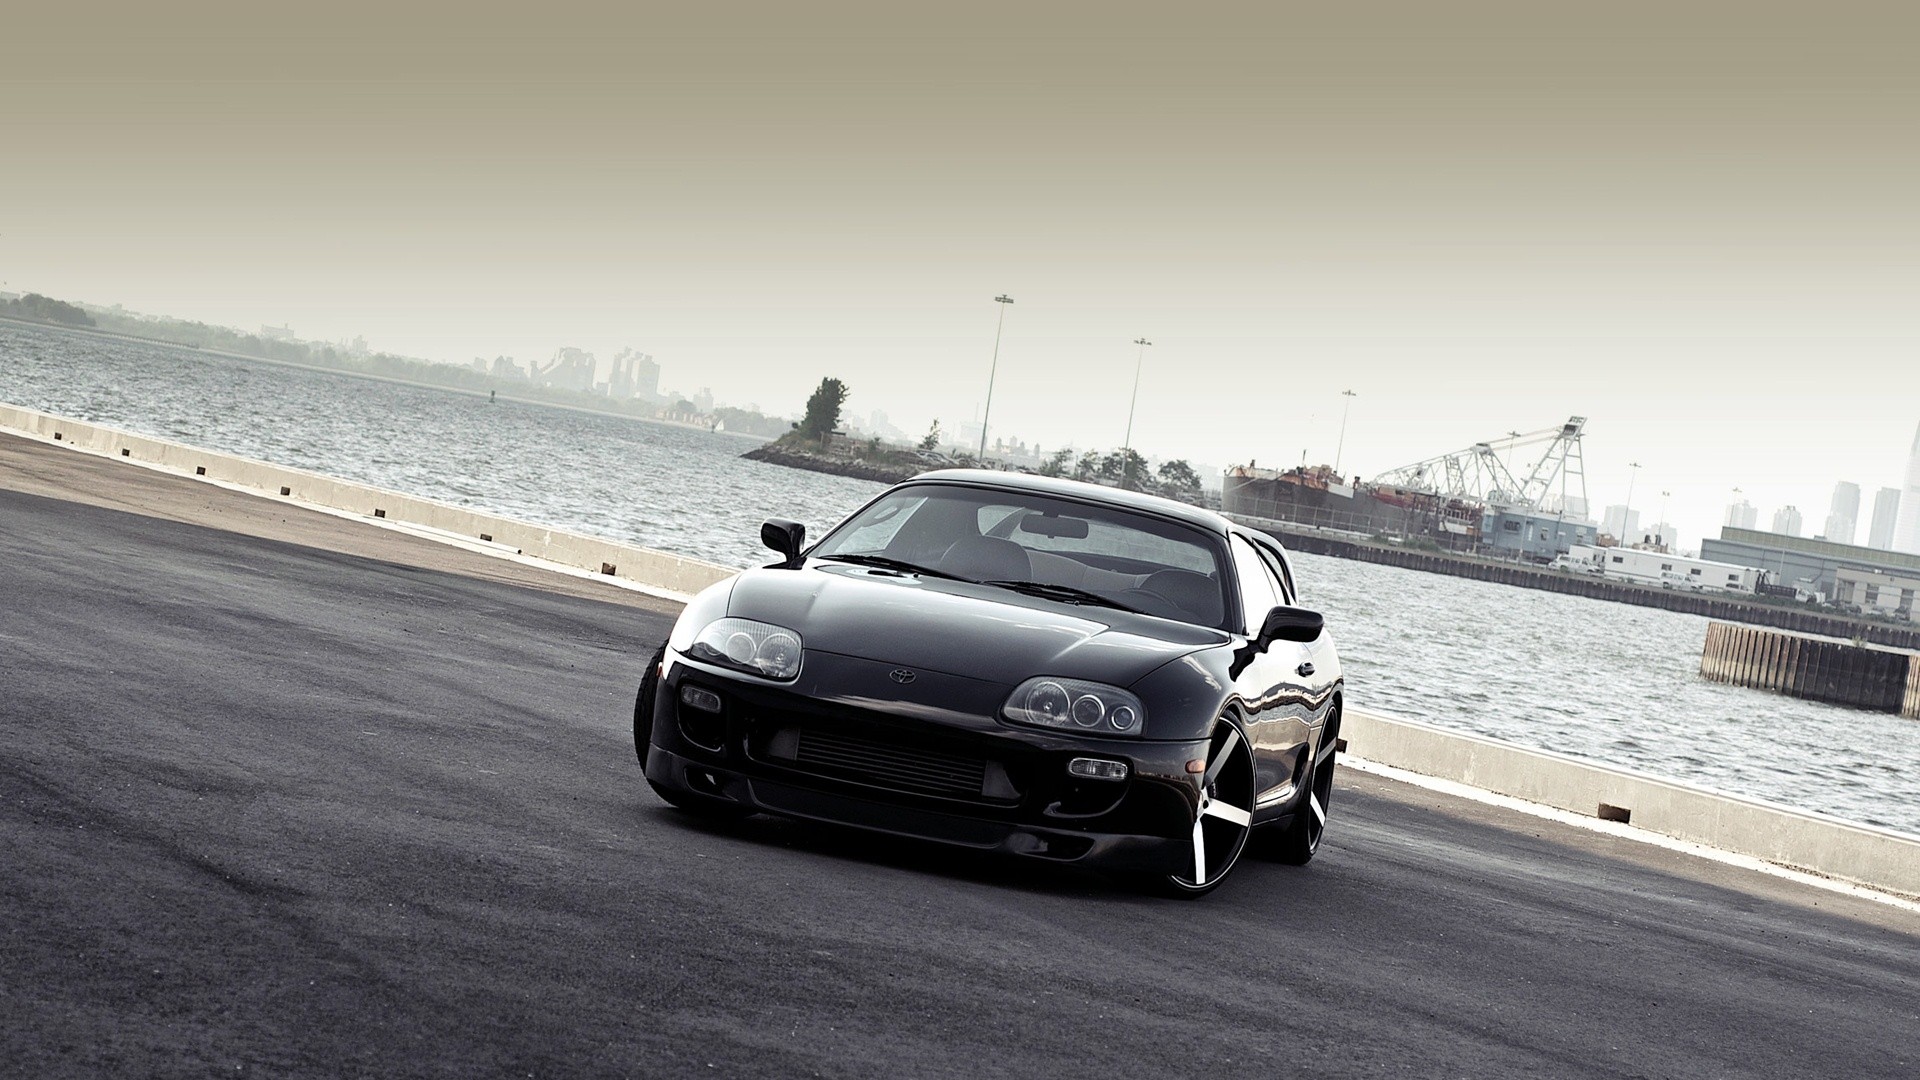 black, Red, Dock, Cars, Sports, Toyota, Outdoors, Vehicles, Supercars, Turbo, Toyota, Supra, Automotive, Automobiles, Exotic, Cars, Supra, Mkiv, Toyota, Supra, Turbo Wallpaper